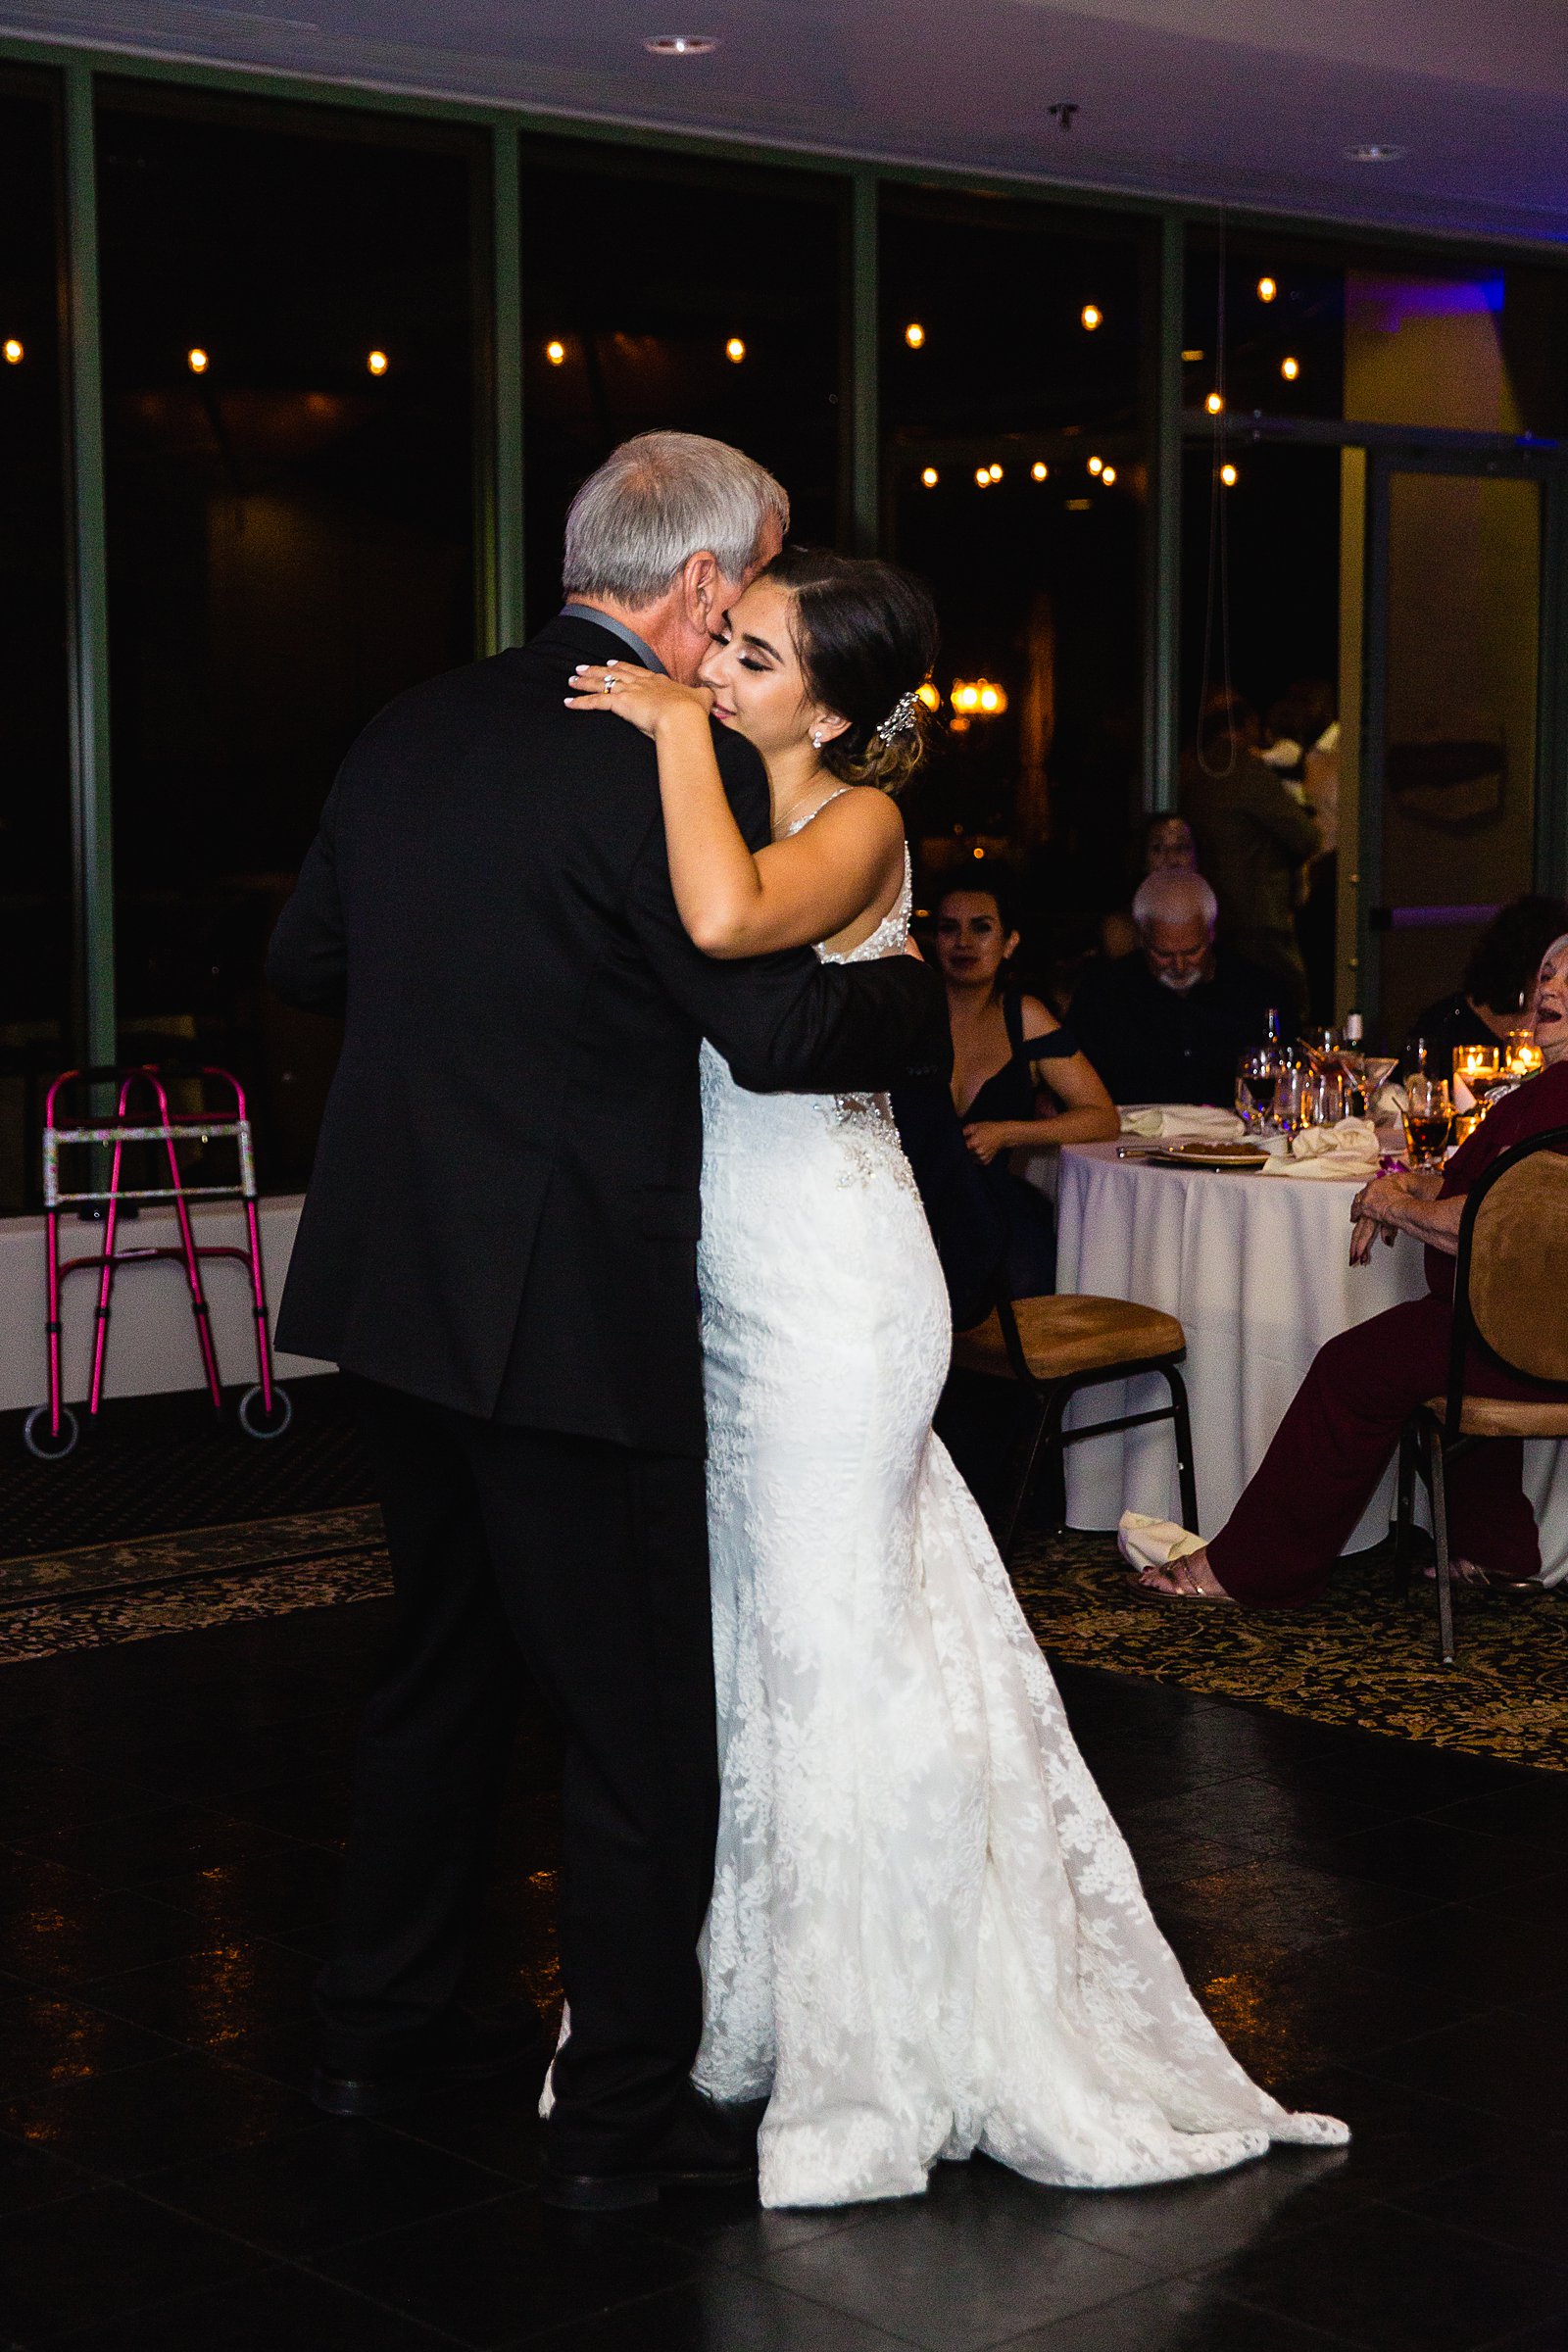 Grandfather and granddaughter dance at Troon North wedding reception by Arizona wedding photographer PMA Photography.